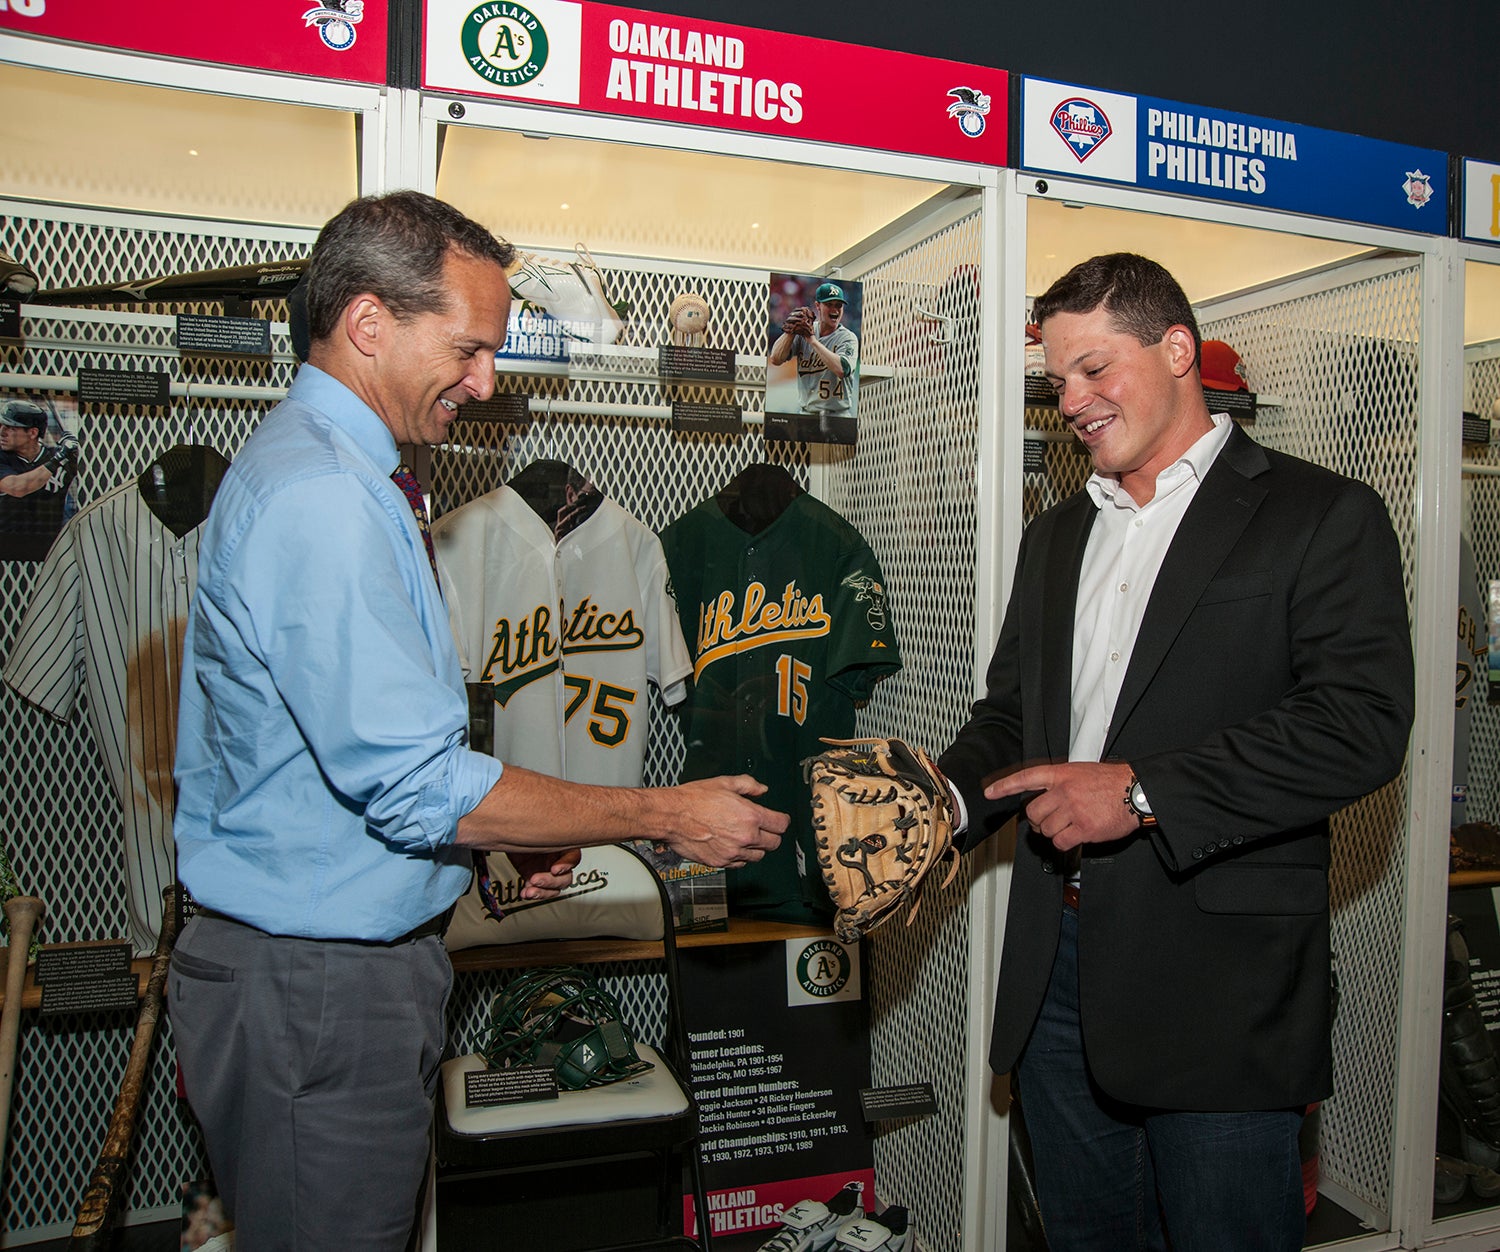 Cooperstown’s Phil Pohl experiences Hall of Fame as never before